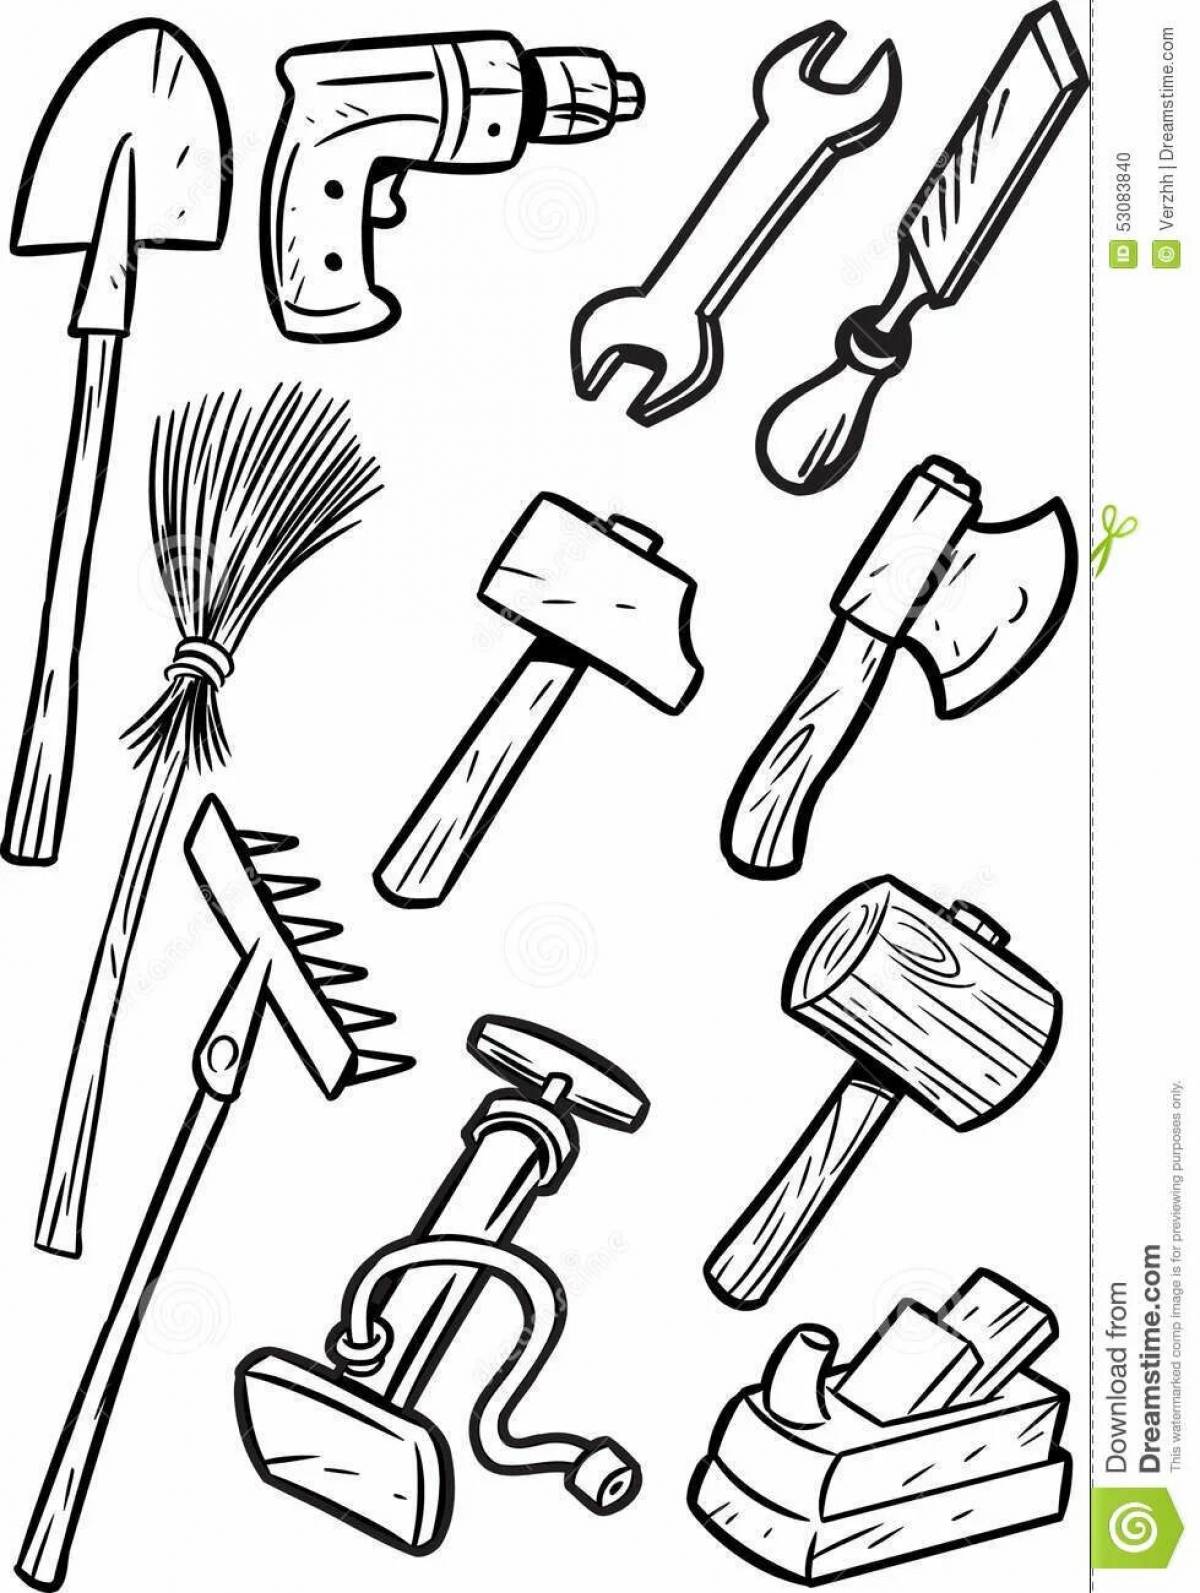 Playful preschool tools coloring page